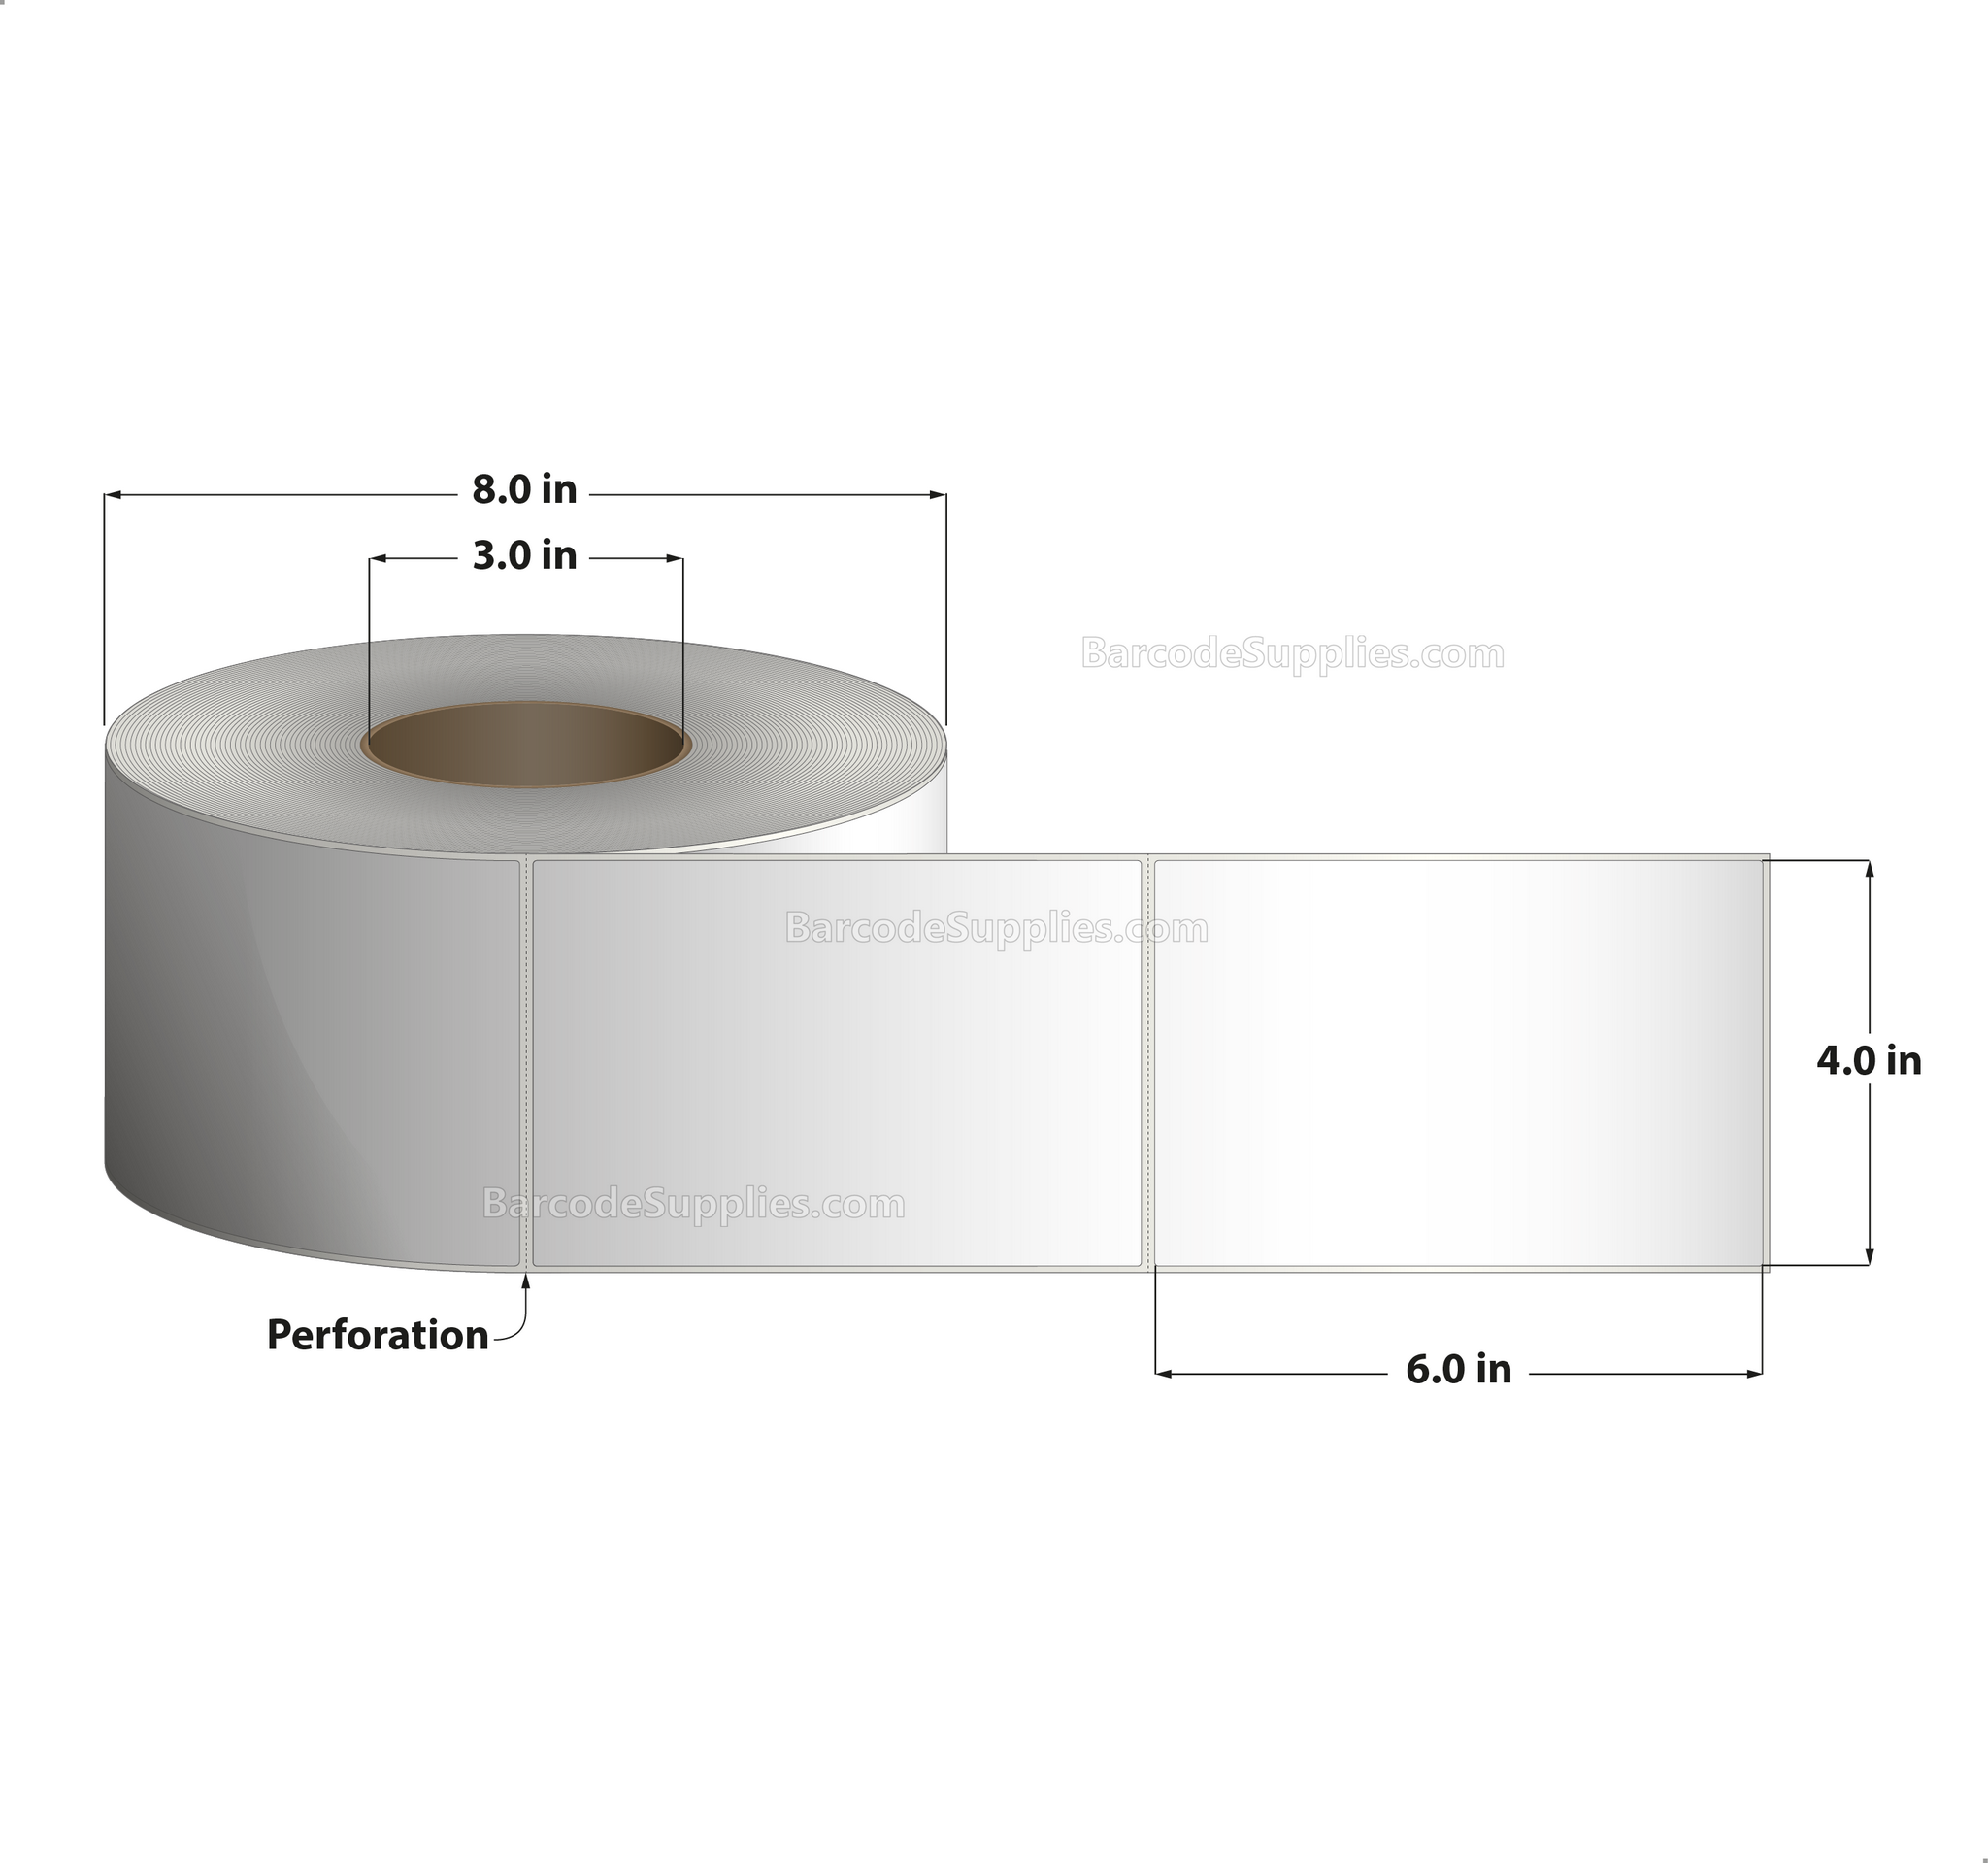 4 x 6 Thermal Transfer White Labels With Rubber Adhesive - Perforated - 1000 Labels Per Roll - Carton Of 4 Rolls - 4000 Labels Total - MPN: CTT400600-3PI